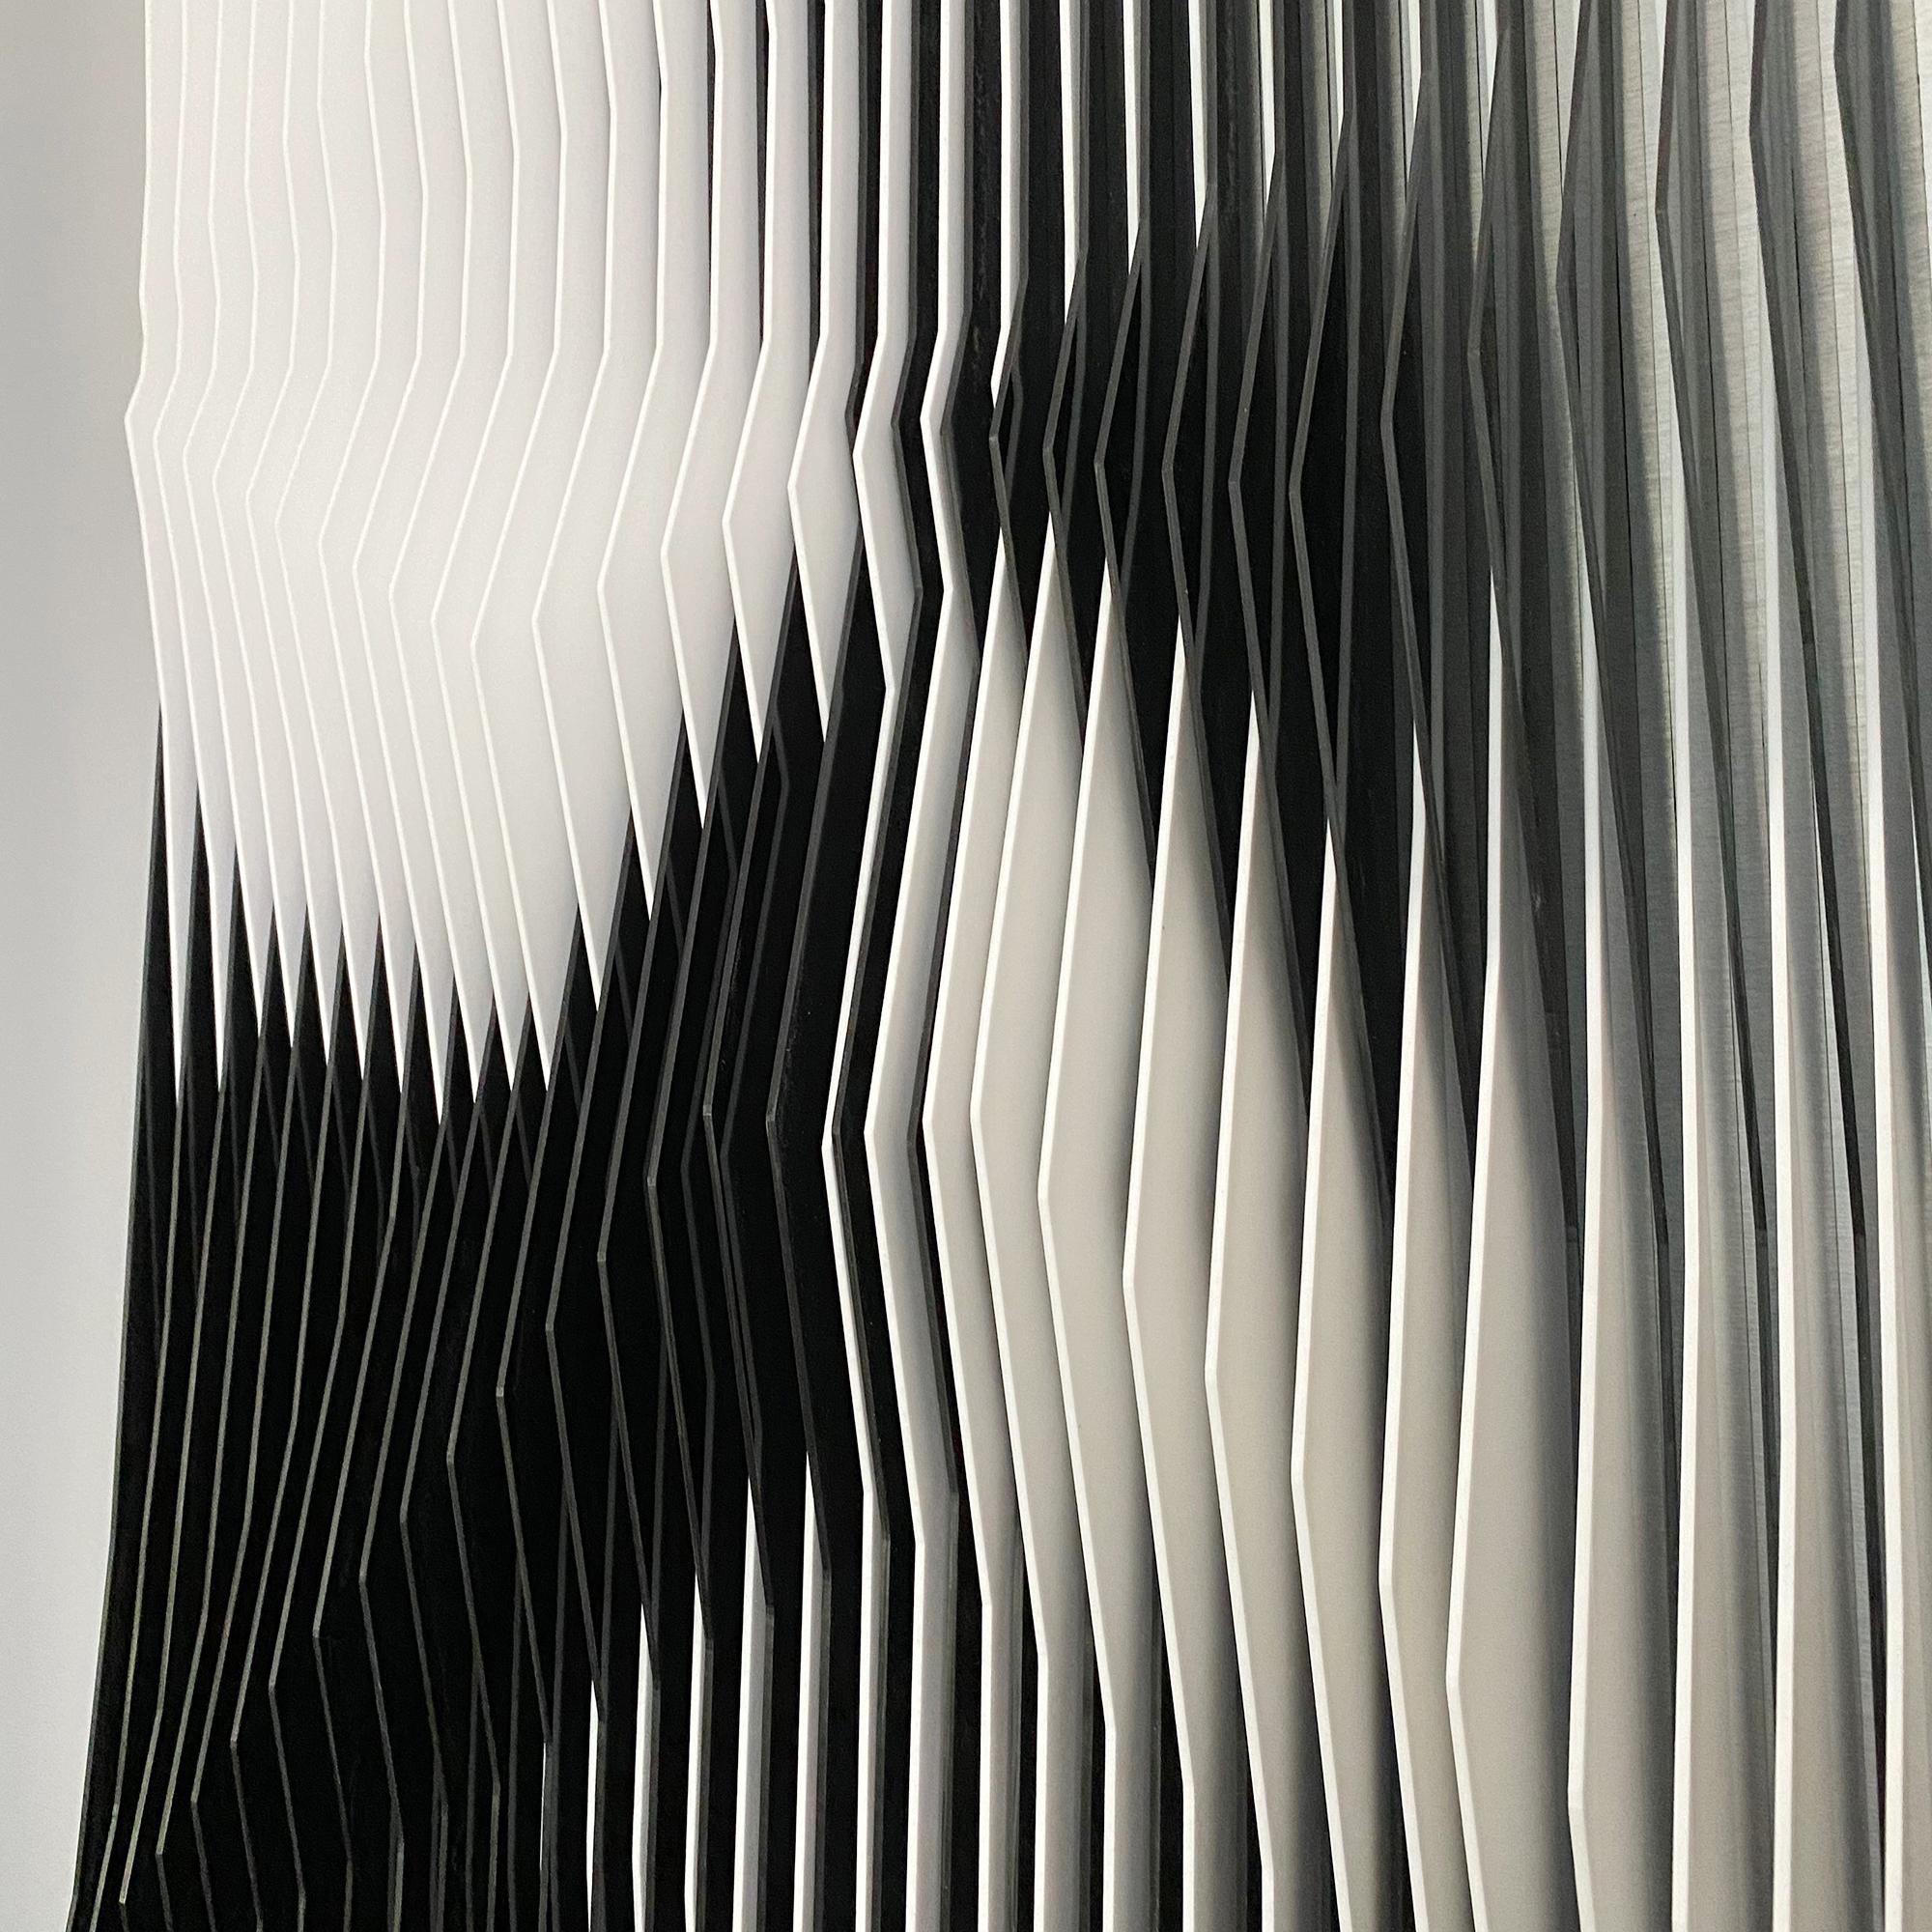 ‘Black Undulation’ is an abstract kinetic art wall sculpture created by Venezuelan artist Jose Margulis in 2017. Featuring a palette made of black and white, this PVC and plexiglass sculpture features a juxtaposition of lines, whose subtle variation